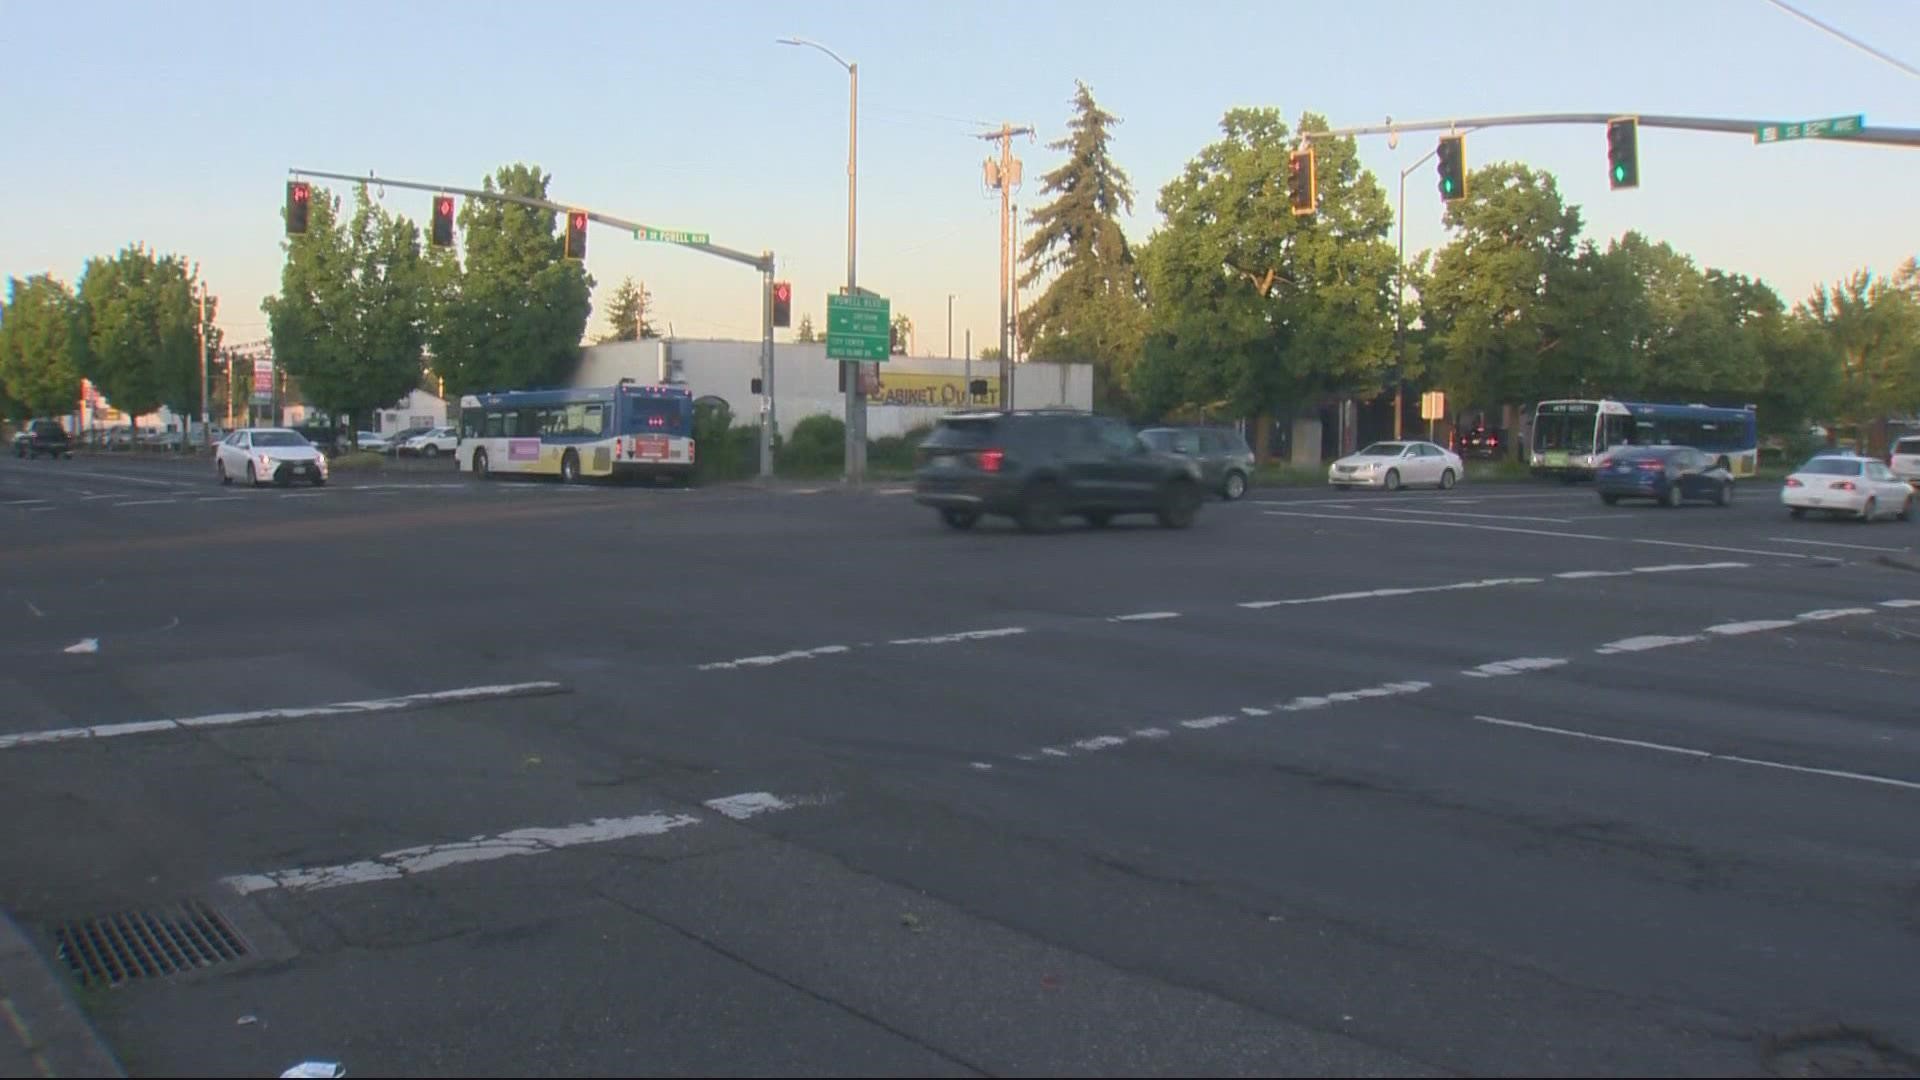 Officers responded to the intersection of Southeast 82nd Avenue and Center Street on June 6 and learned that a vehicle hit and killed a pedestrian.